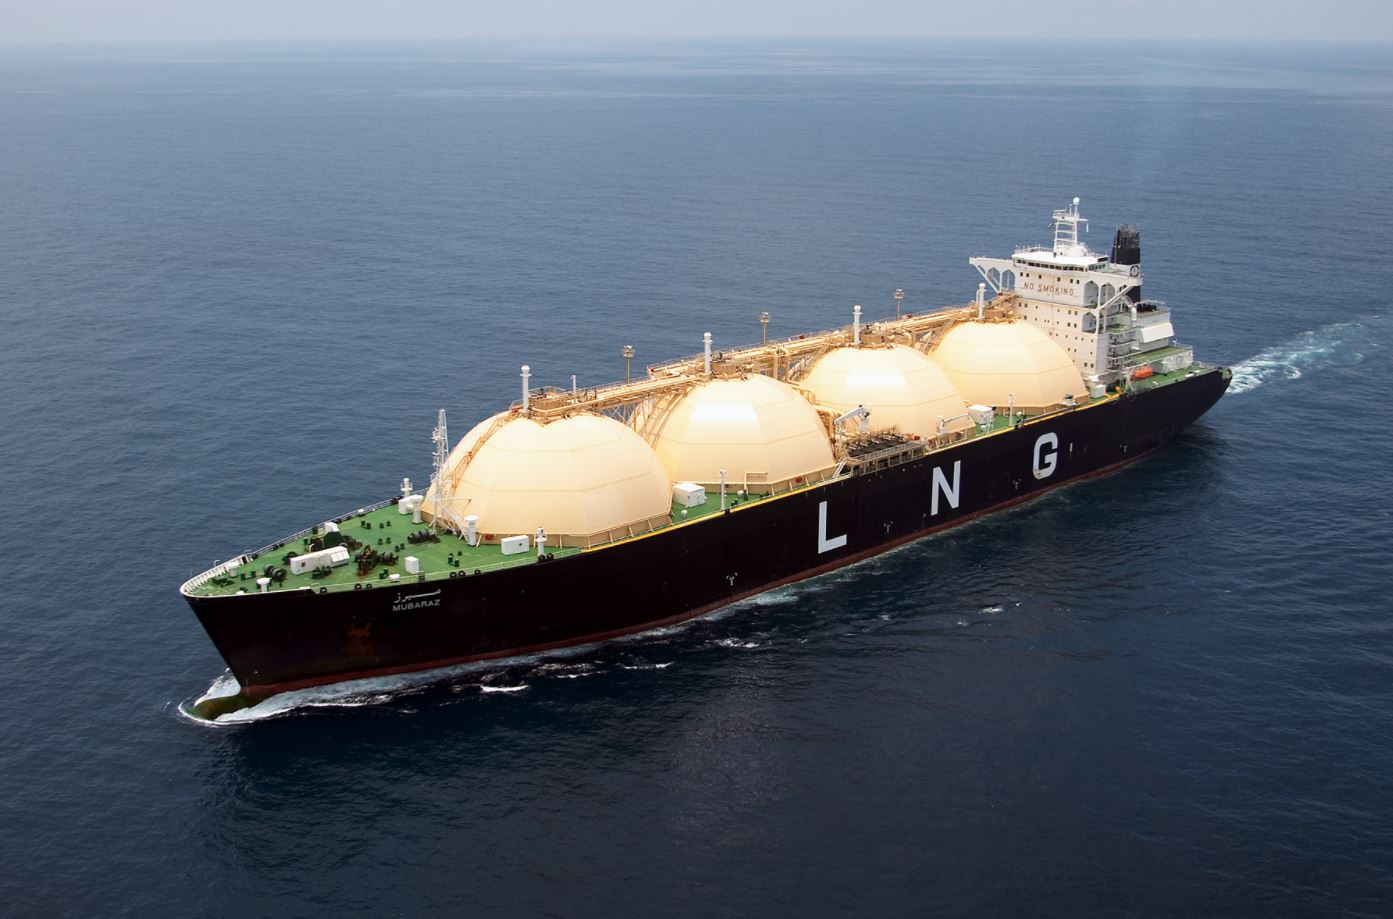 UAE's ADNOC inks LNG deals with Total and Vitol